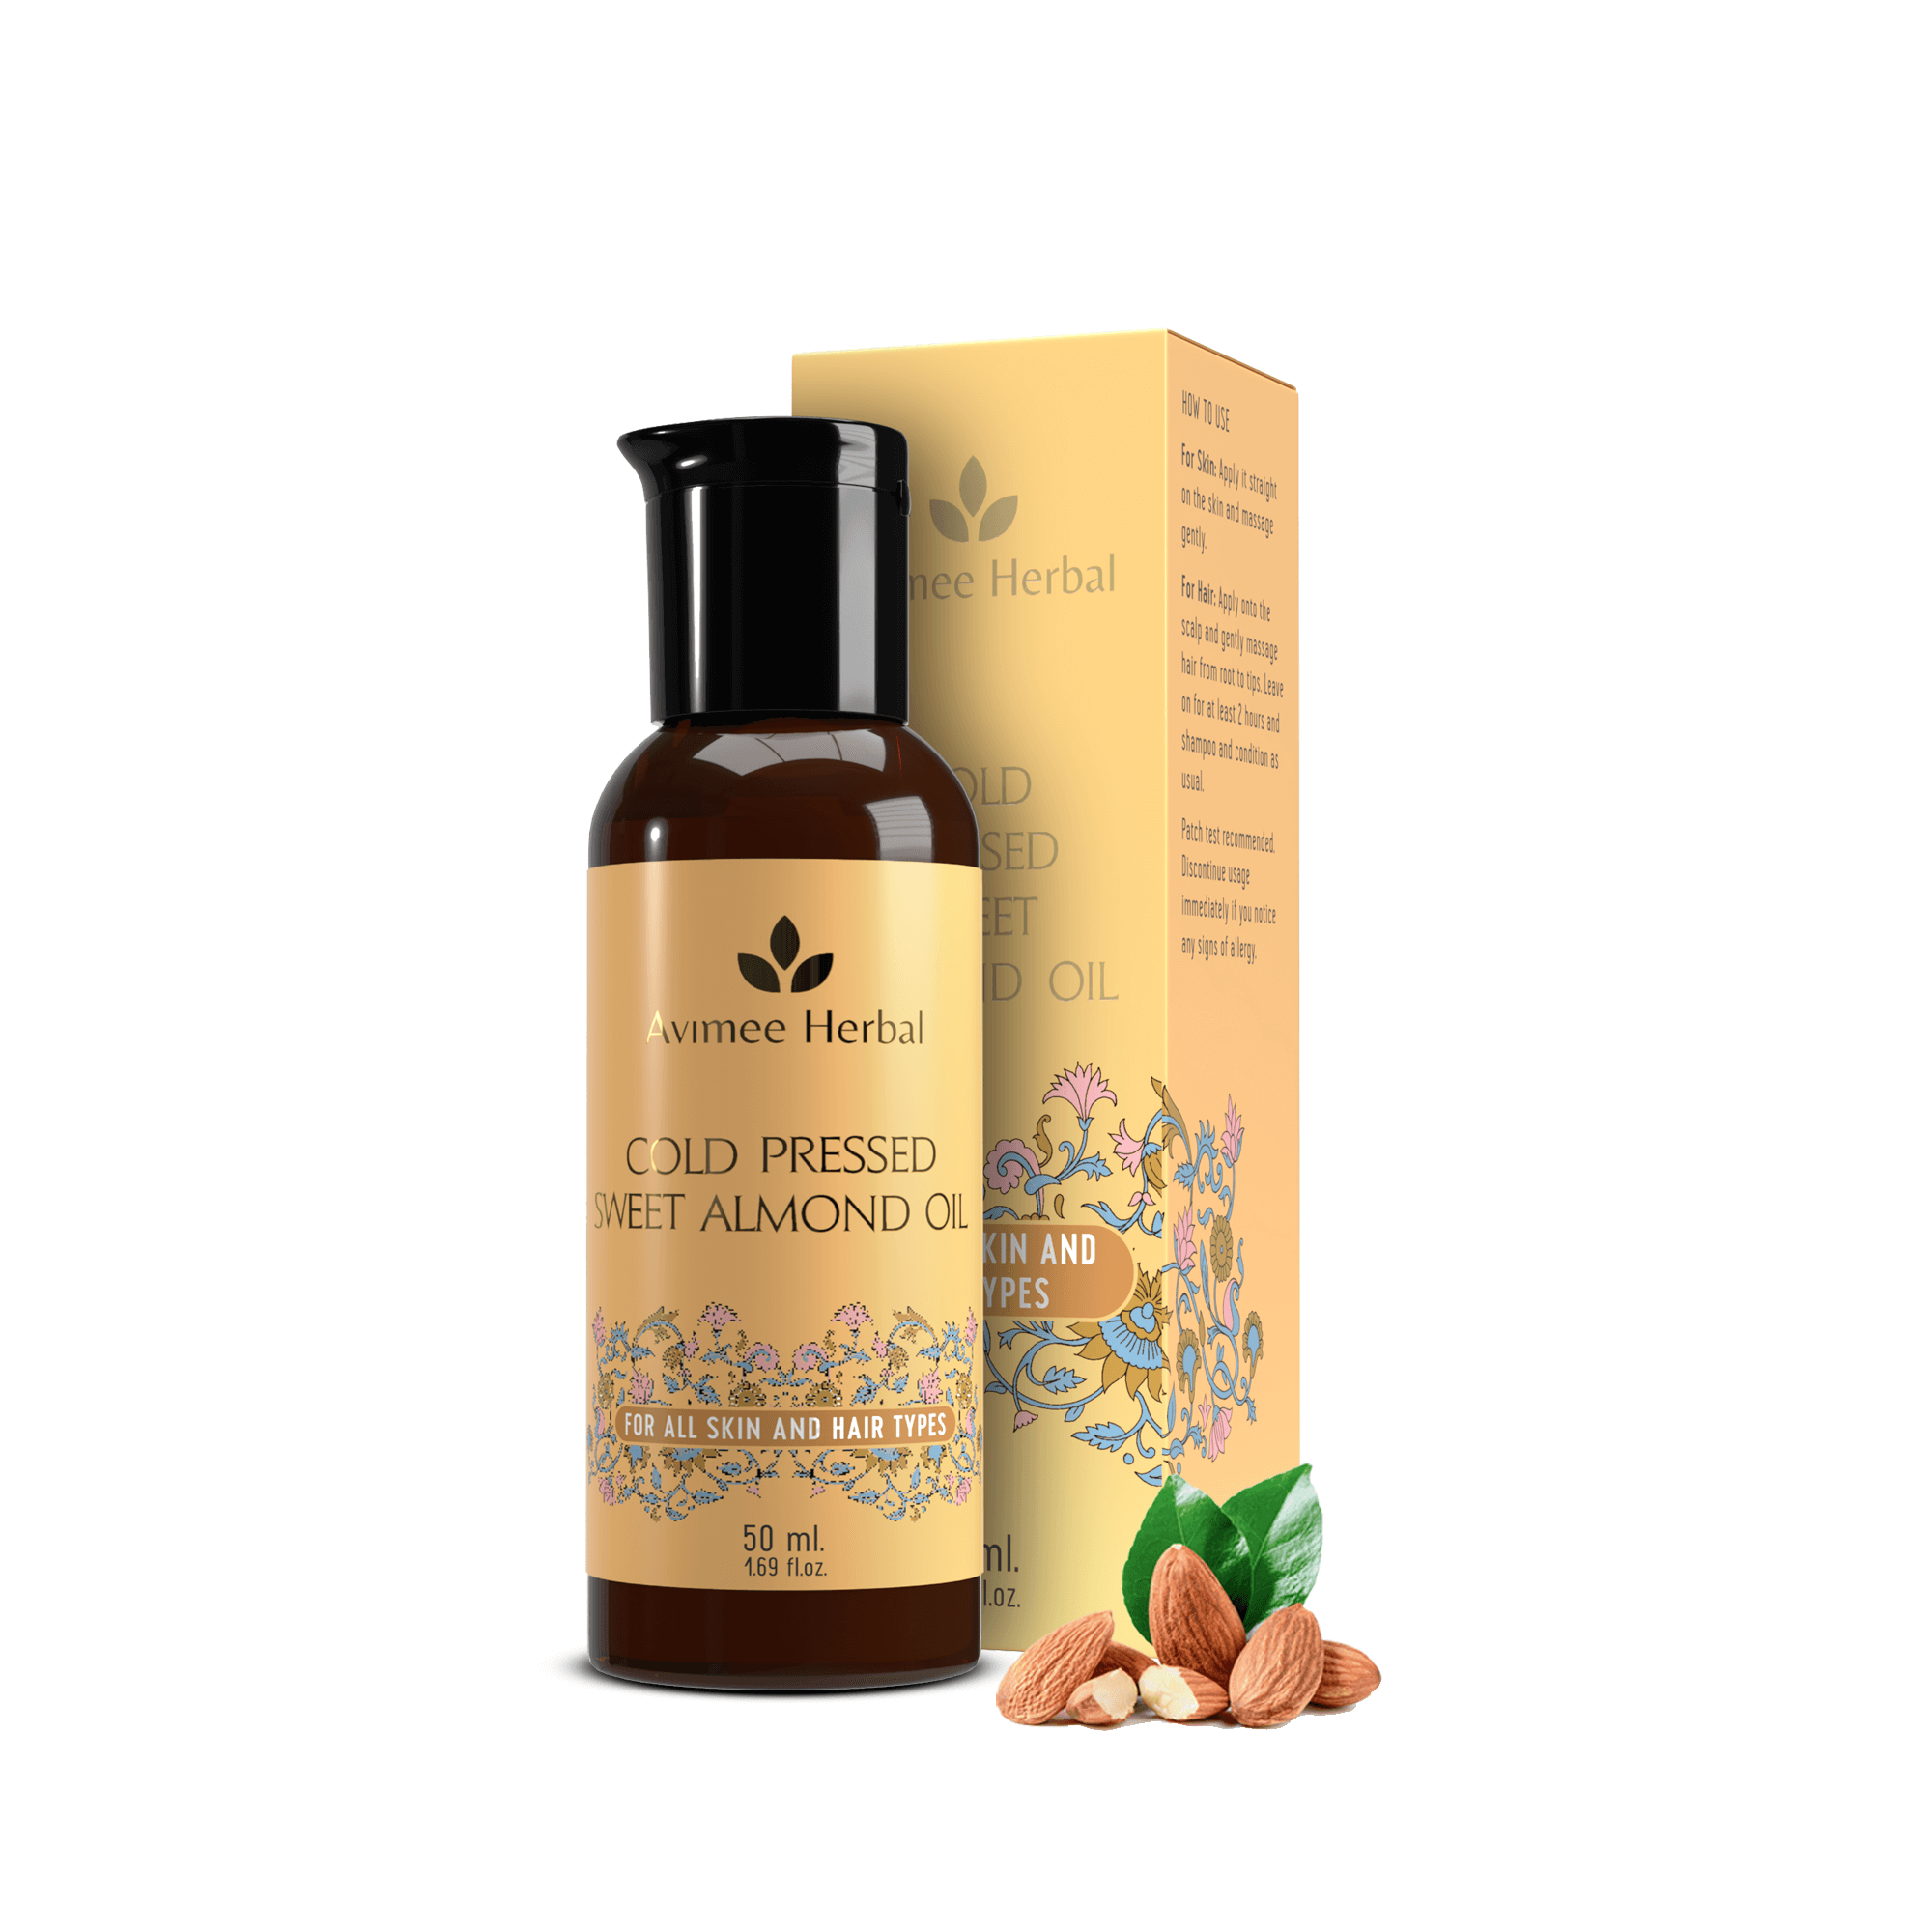 Buy Cold Pressed Sweet Almond Oil